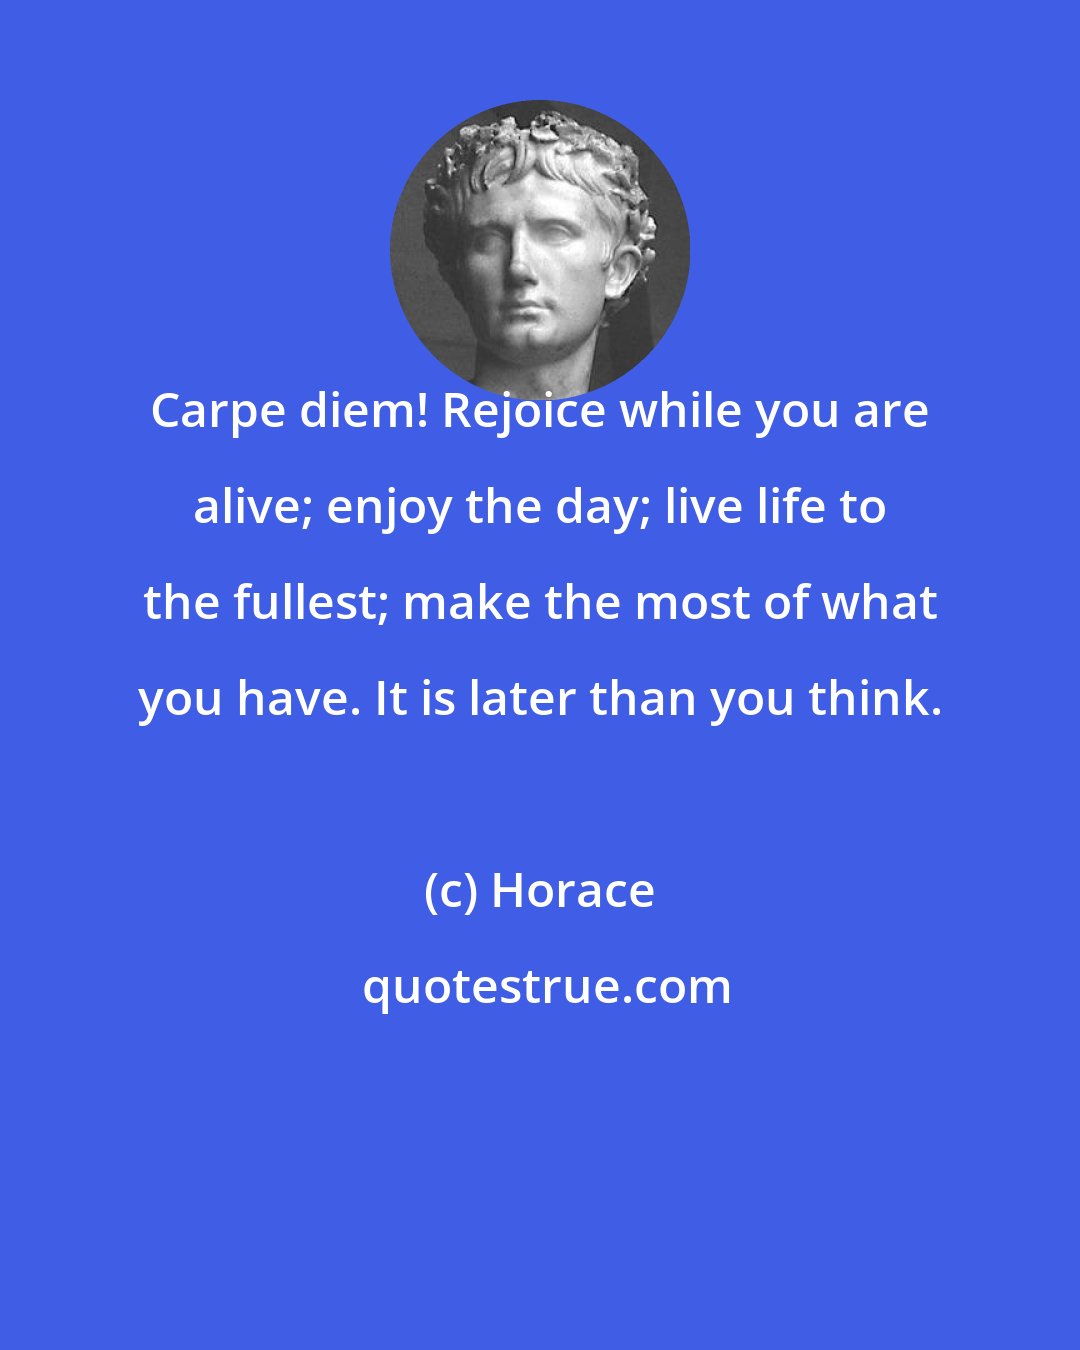 Horace: Carpe diem! Rejoice while you are alive; enjoy the day; live life to the fullest; make the most of what you have. It is later than you think.